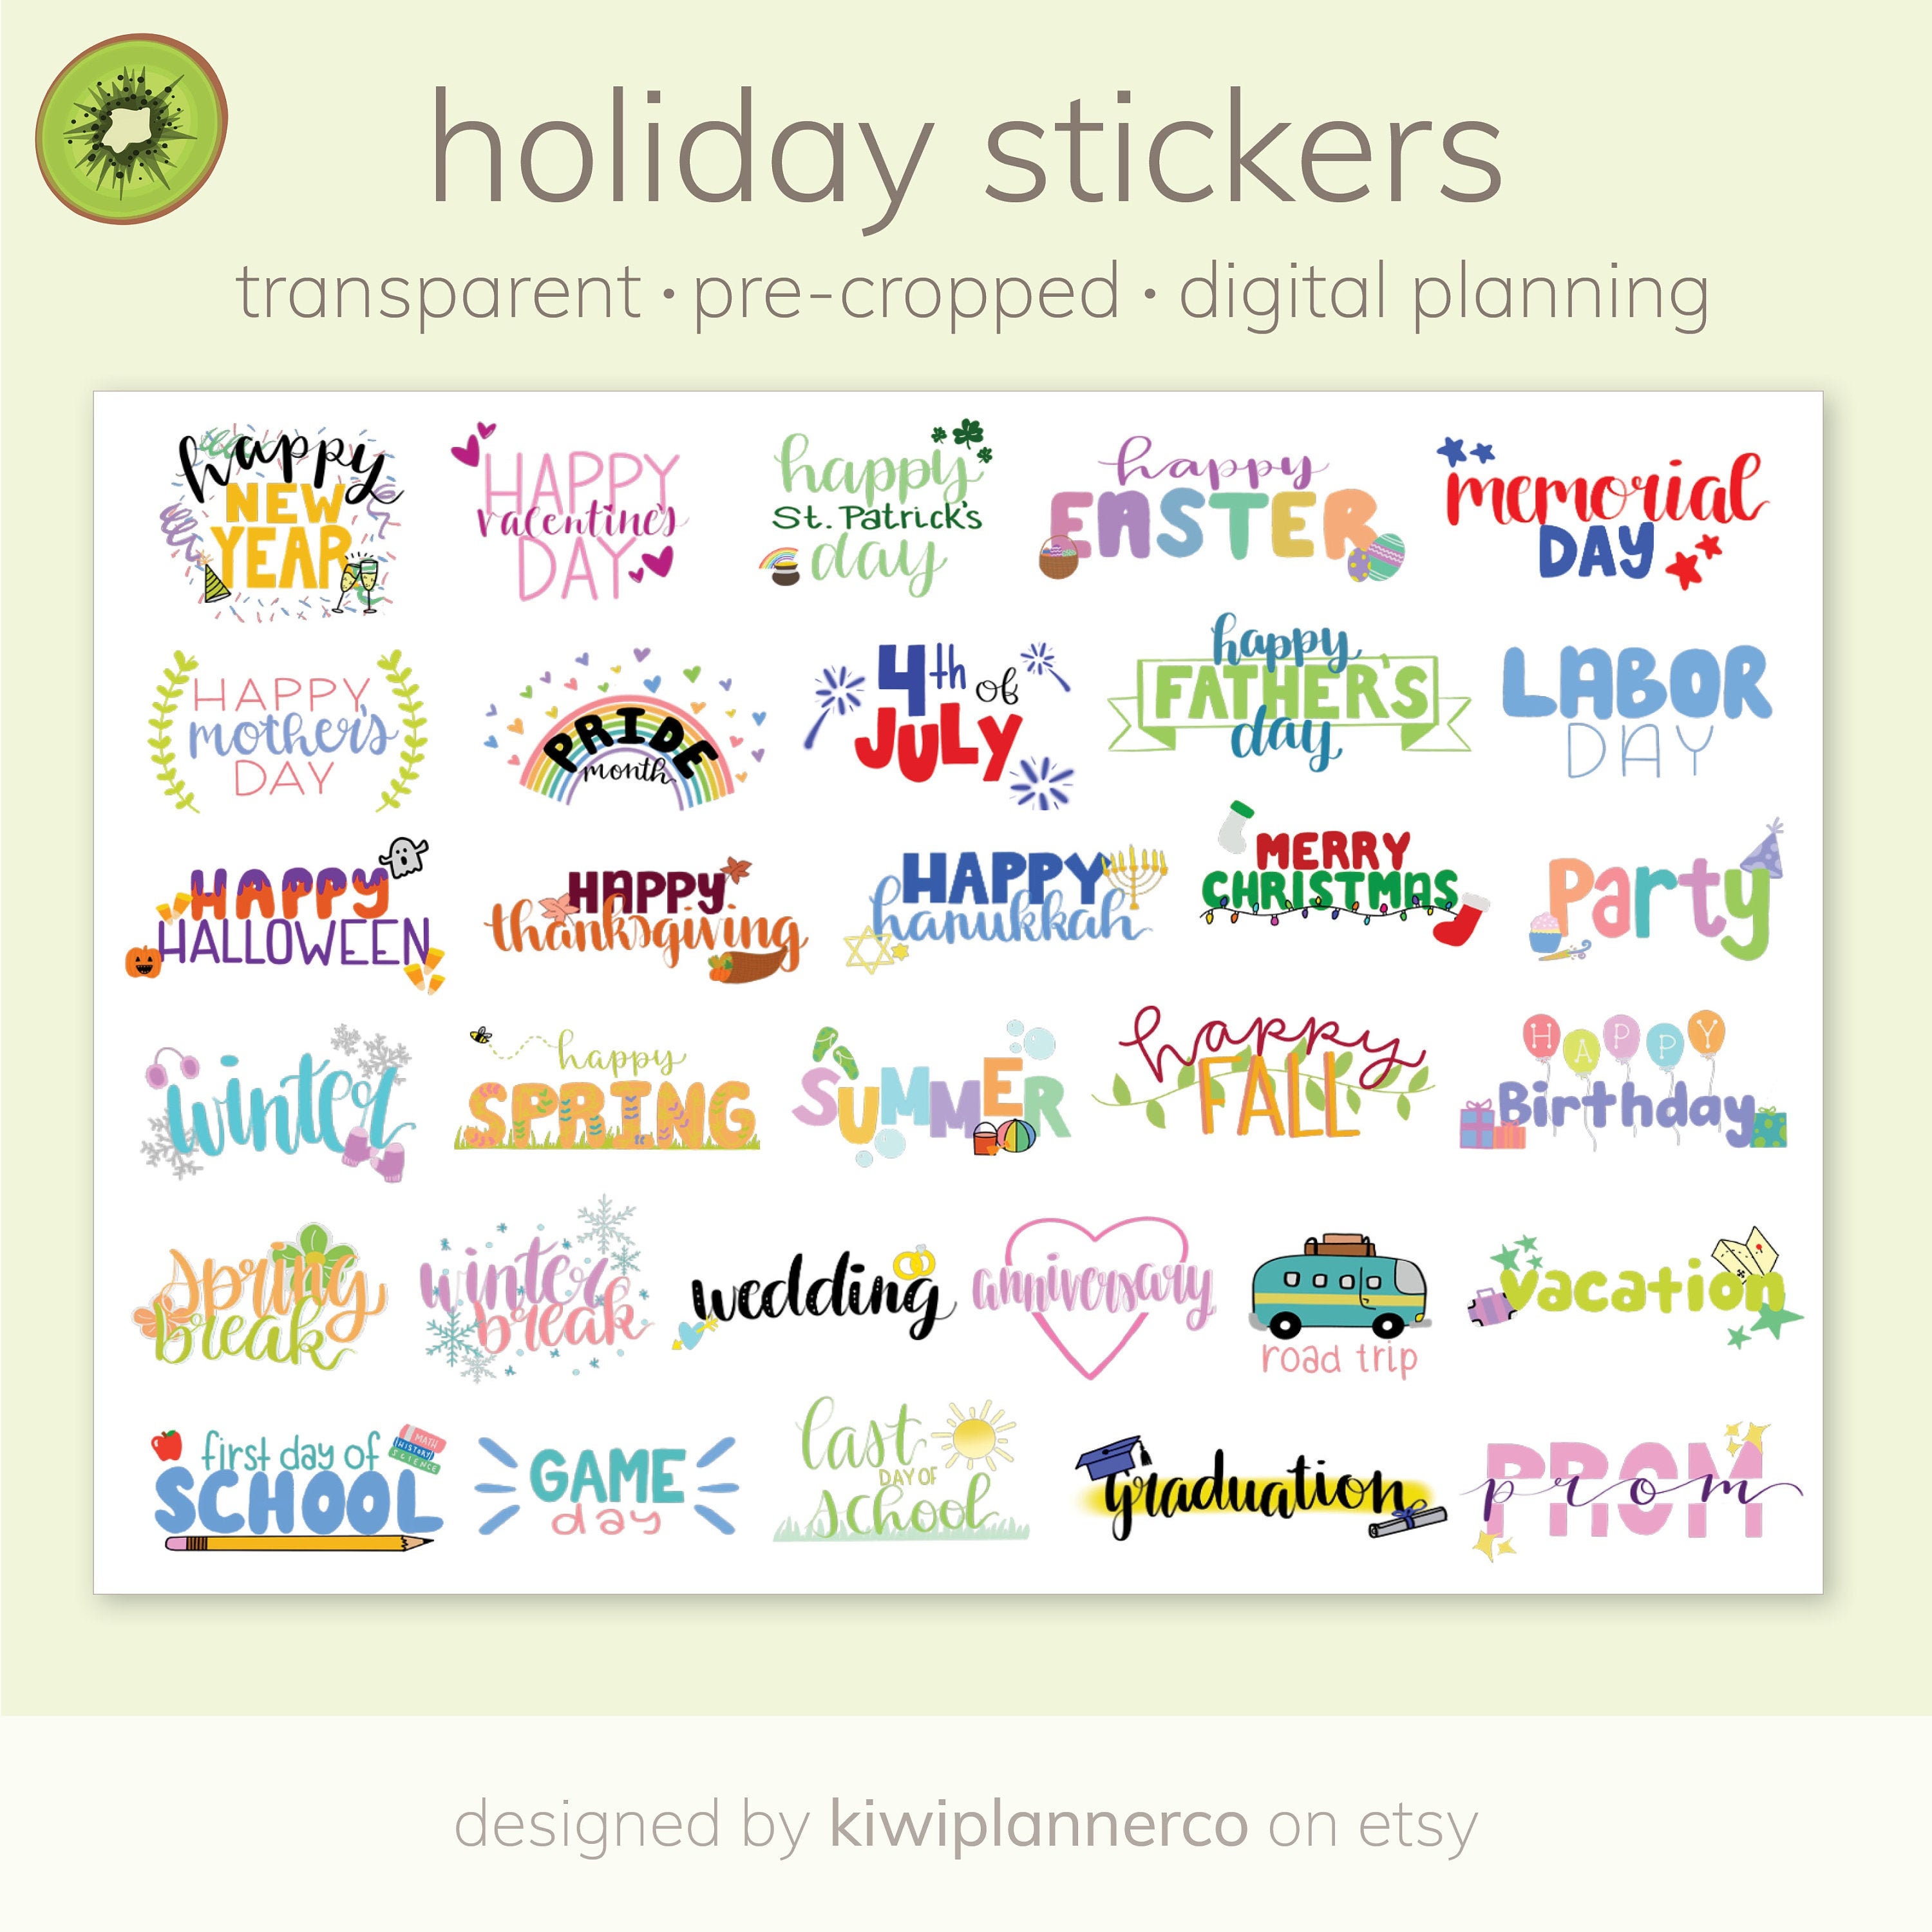 Digital Stickers HOLIDAY EDITION Transparent, Pre-cropped Goodnotes,  Notability, Ipad/tablet Stickers for Holidays & Occasions 